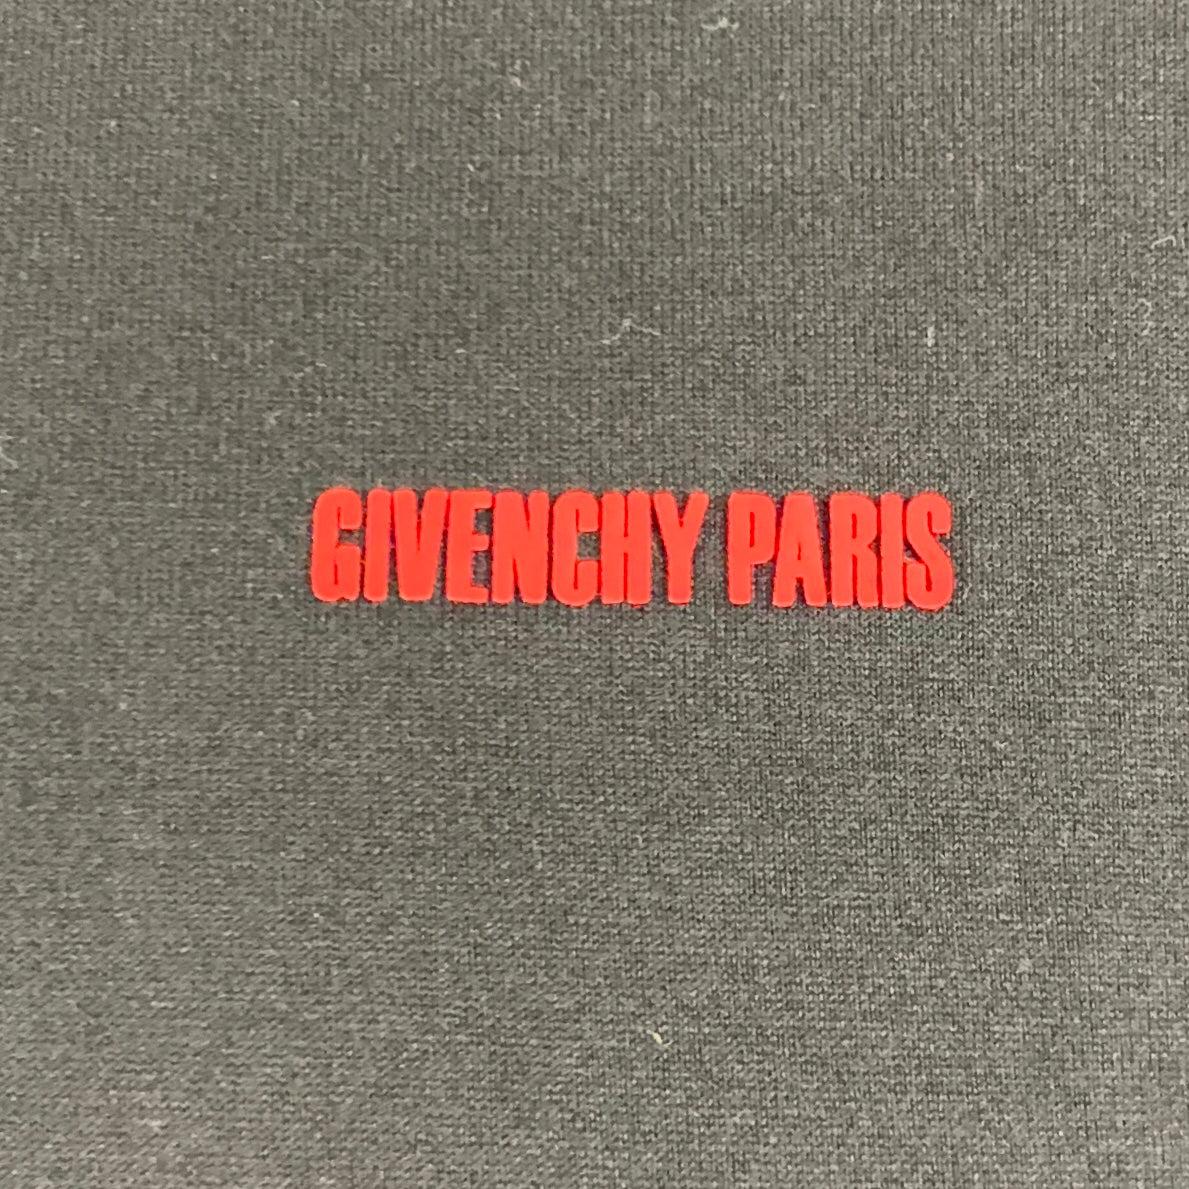 GIVENCHY long sleeve t-shirt
in a black cotton fabric featuring a casual double sleeve style, red graphic sleeves, and a crew neck. Made in Portugal.Excellent Pre-Owned Condition. 

Marked:   XL 

Measurements: 
 
Shoulder: 21.5 inches Chest: 47